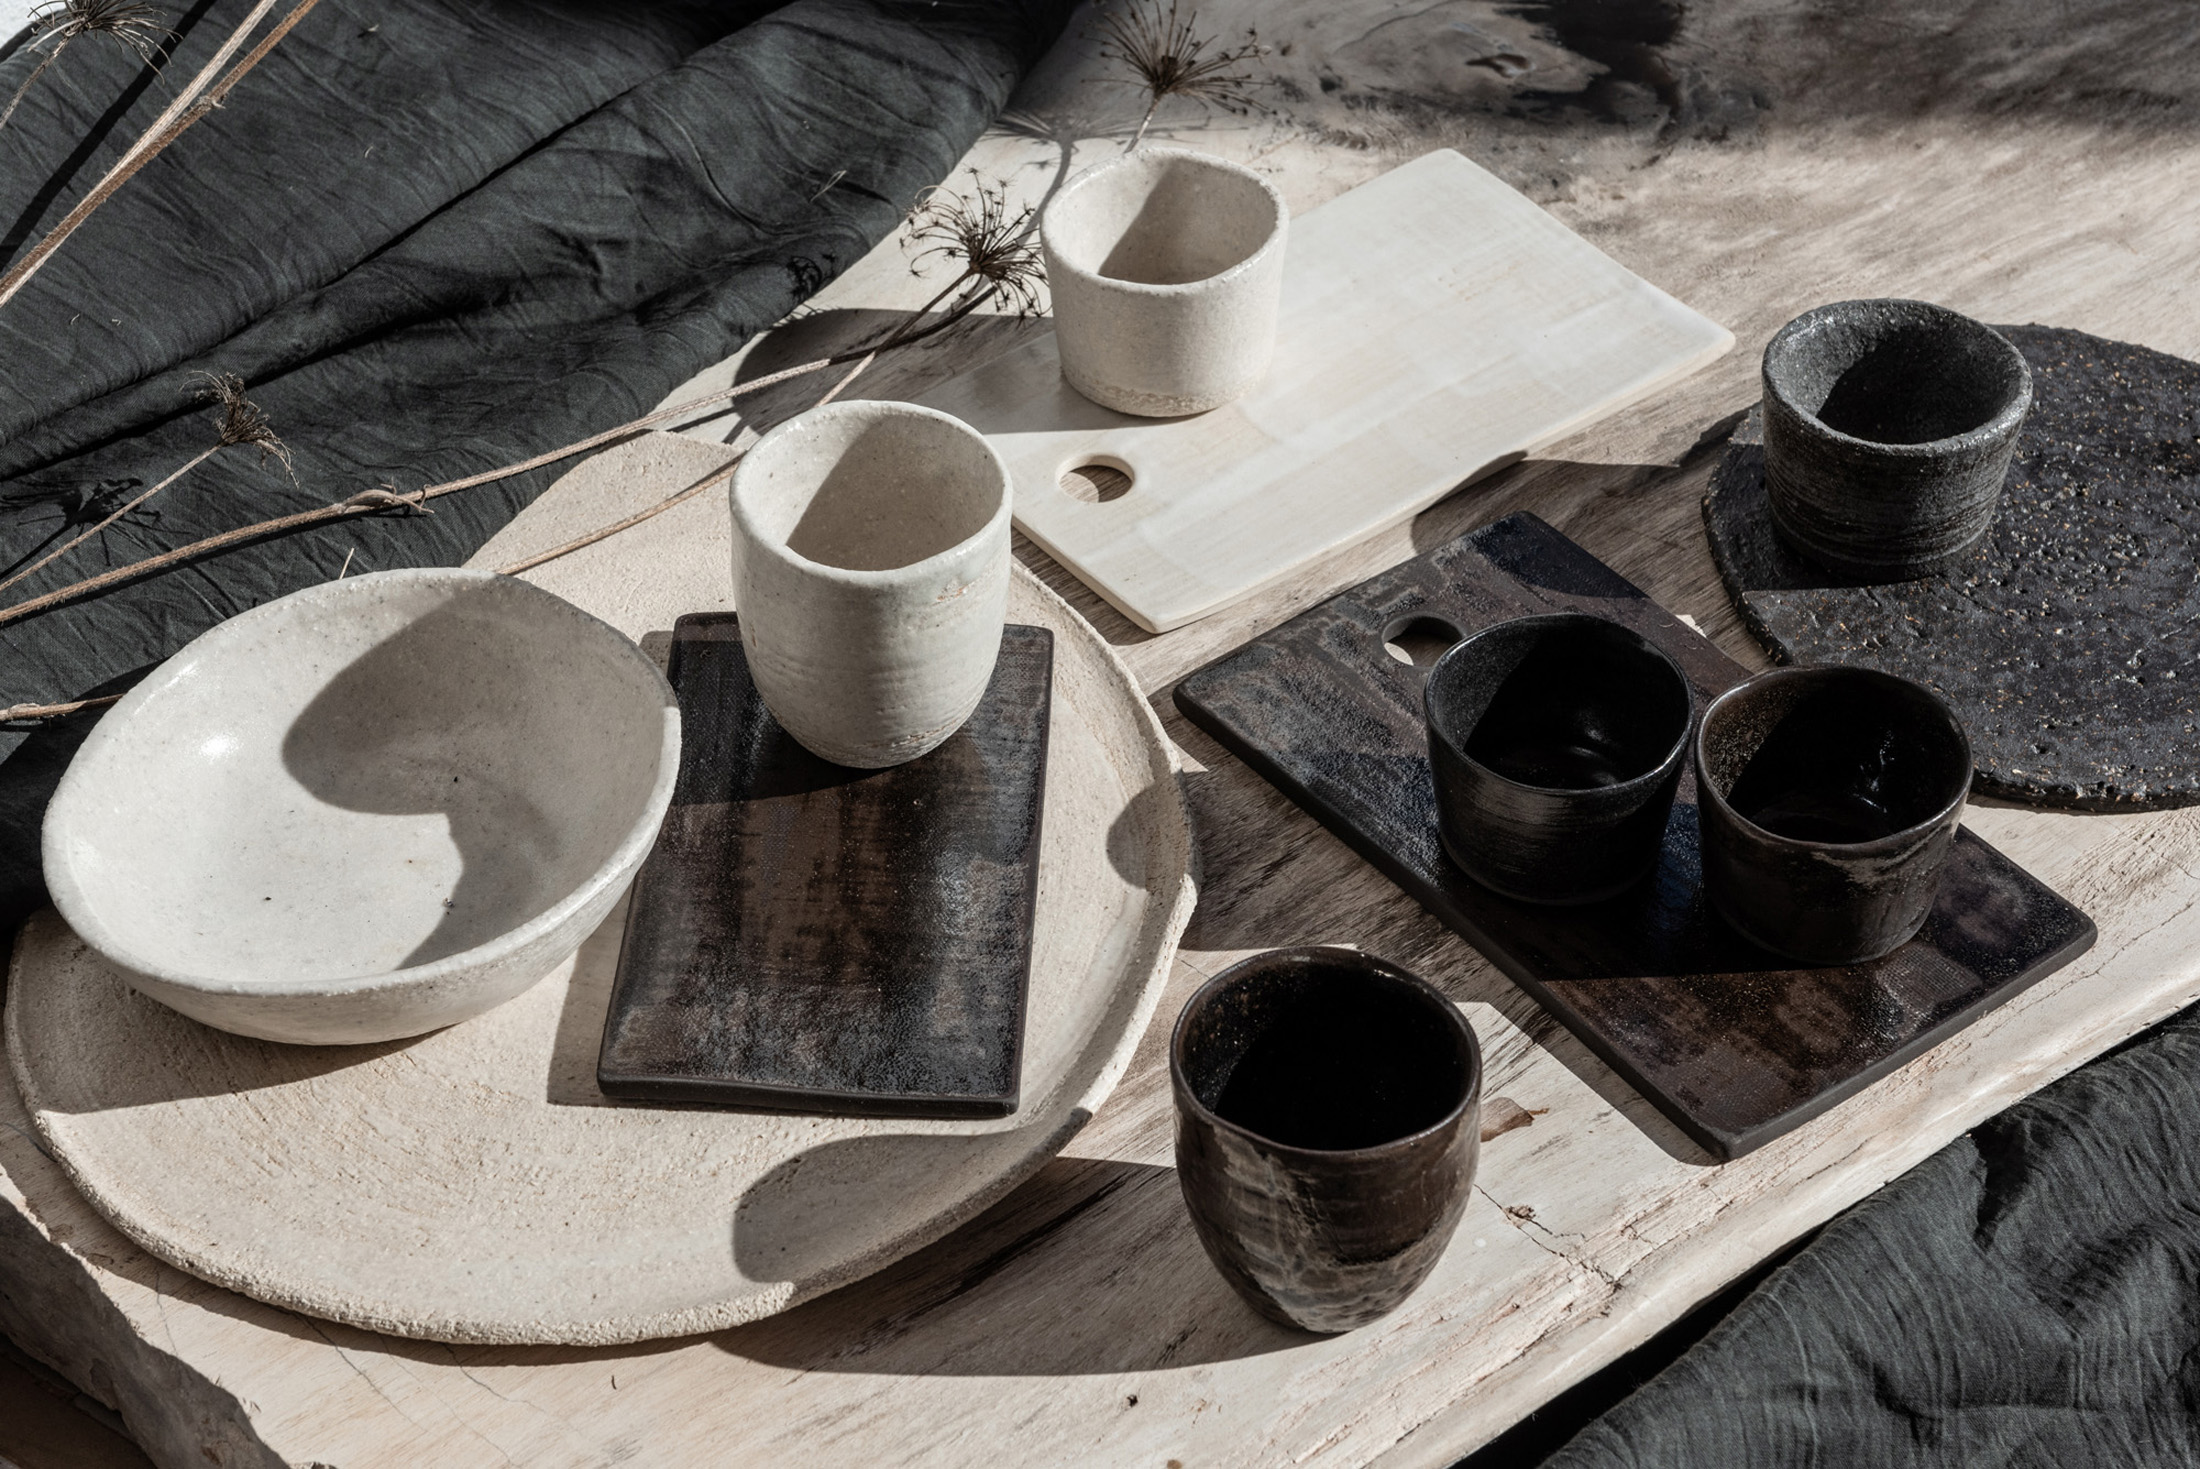 Artisinal ceramics in Notting Hill and Ibiza by Katrina Phillips - monochrome homeware and ceramic cups